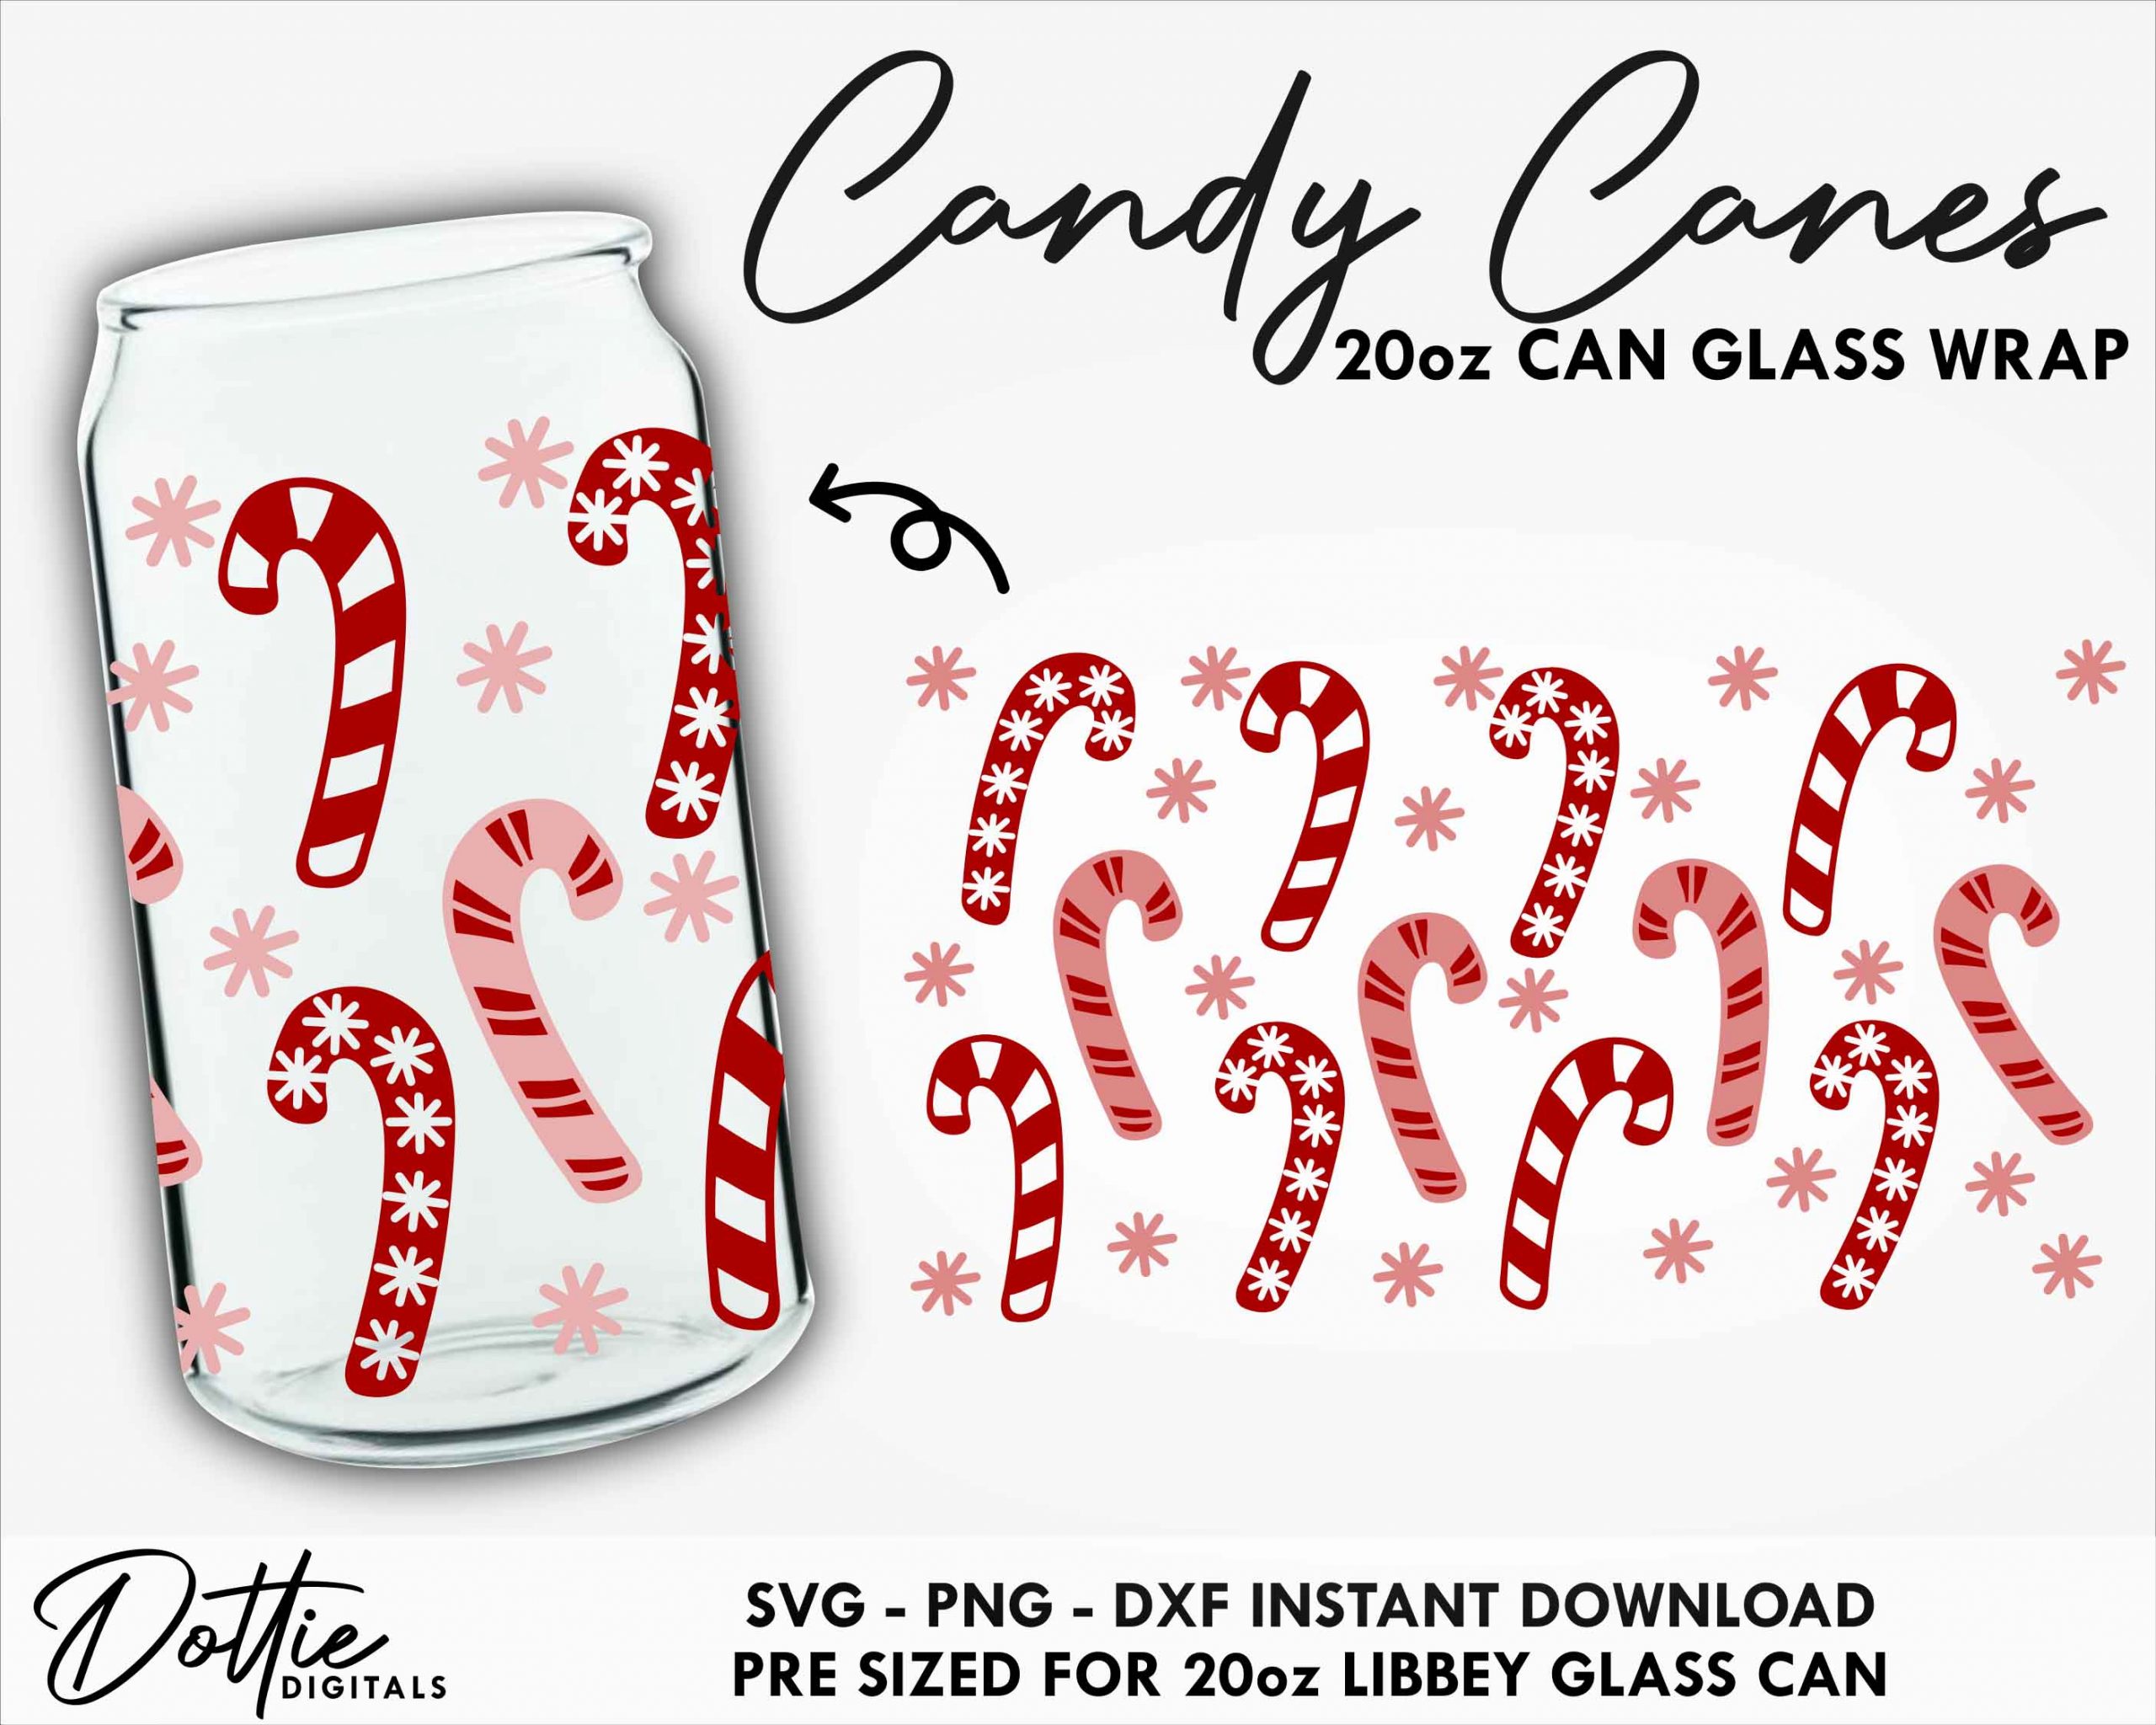 https://dottiedigitals.com/wp-content/uploads/2021/11/Candy-Canes-Libbey-Glass-Can-SVG-20oz-Libbey-Can-Sweets-Christmas-Wrap-Svg-PNG-DXF-Xmas-Candies-Libbey-Cup-1-scaled.jpg